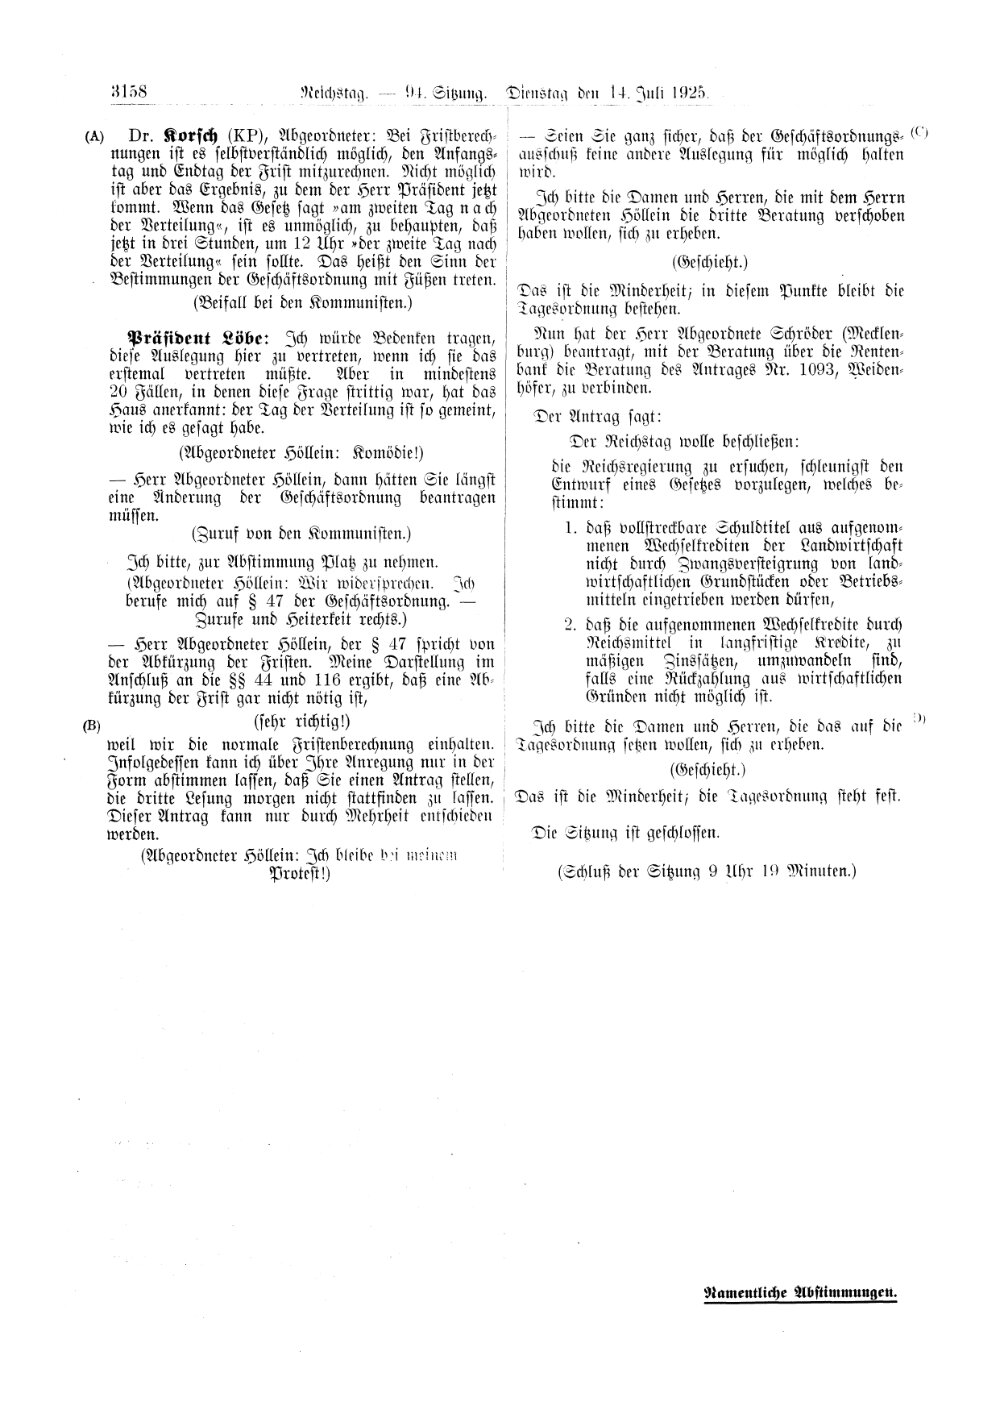 Scan of page 3158